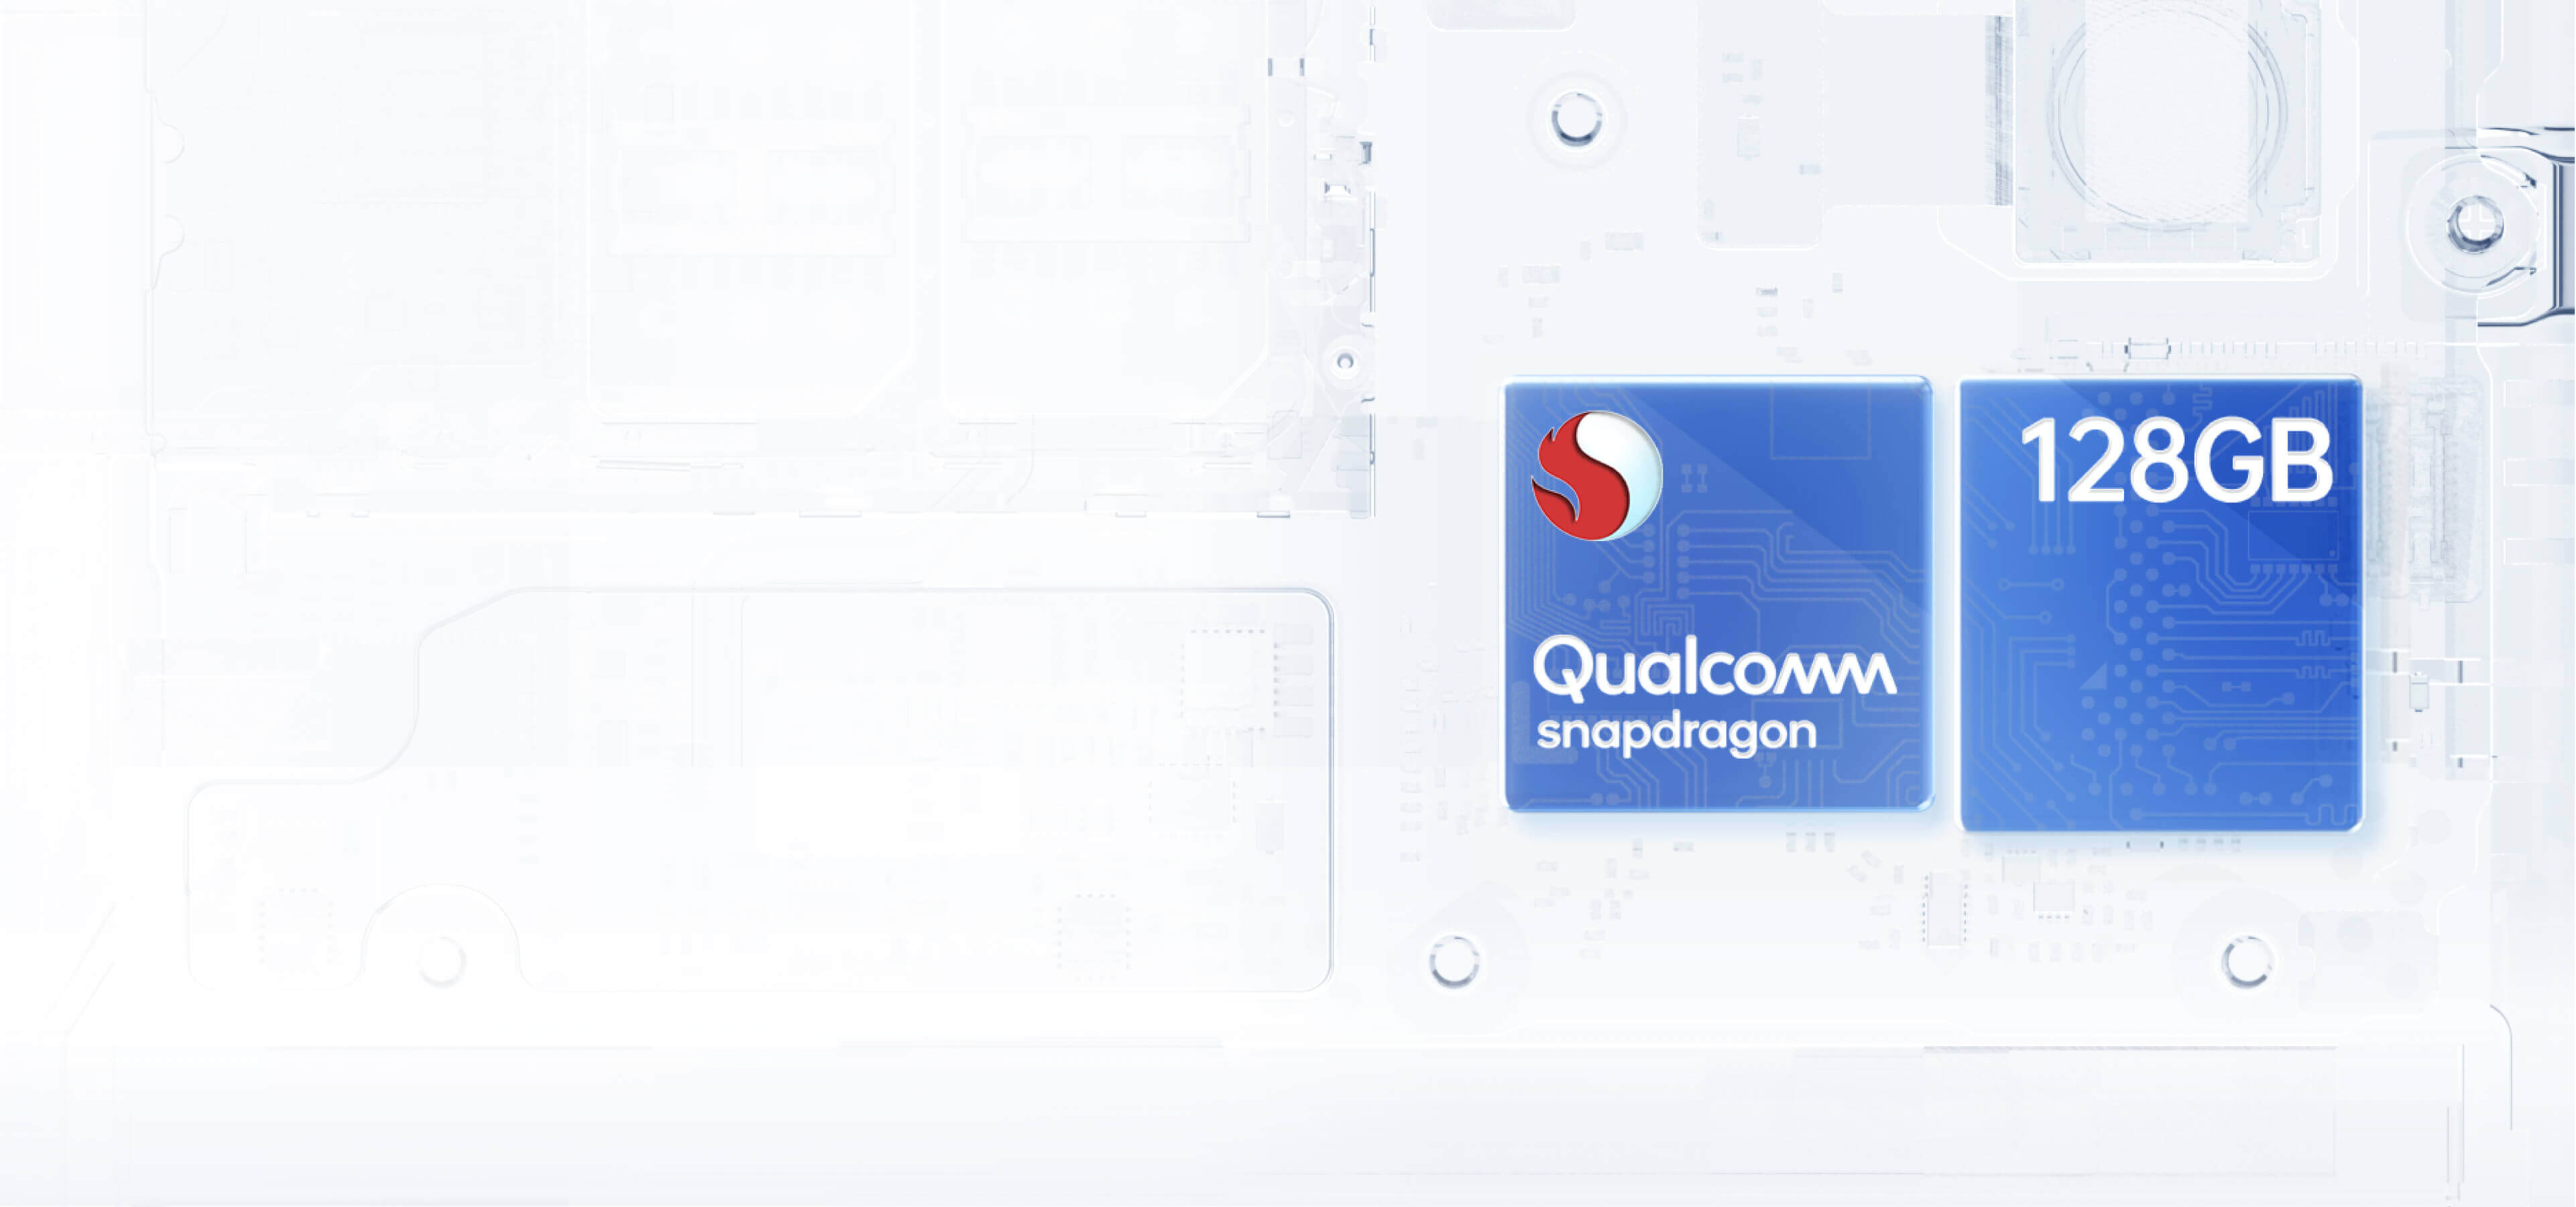 OPPO A53 Qualcomm Snapdragon